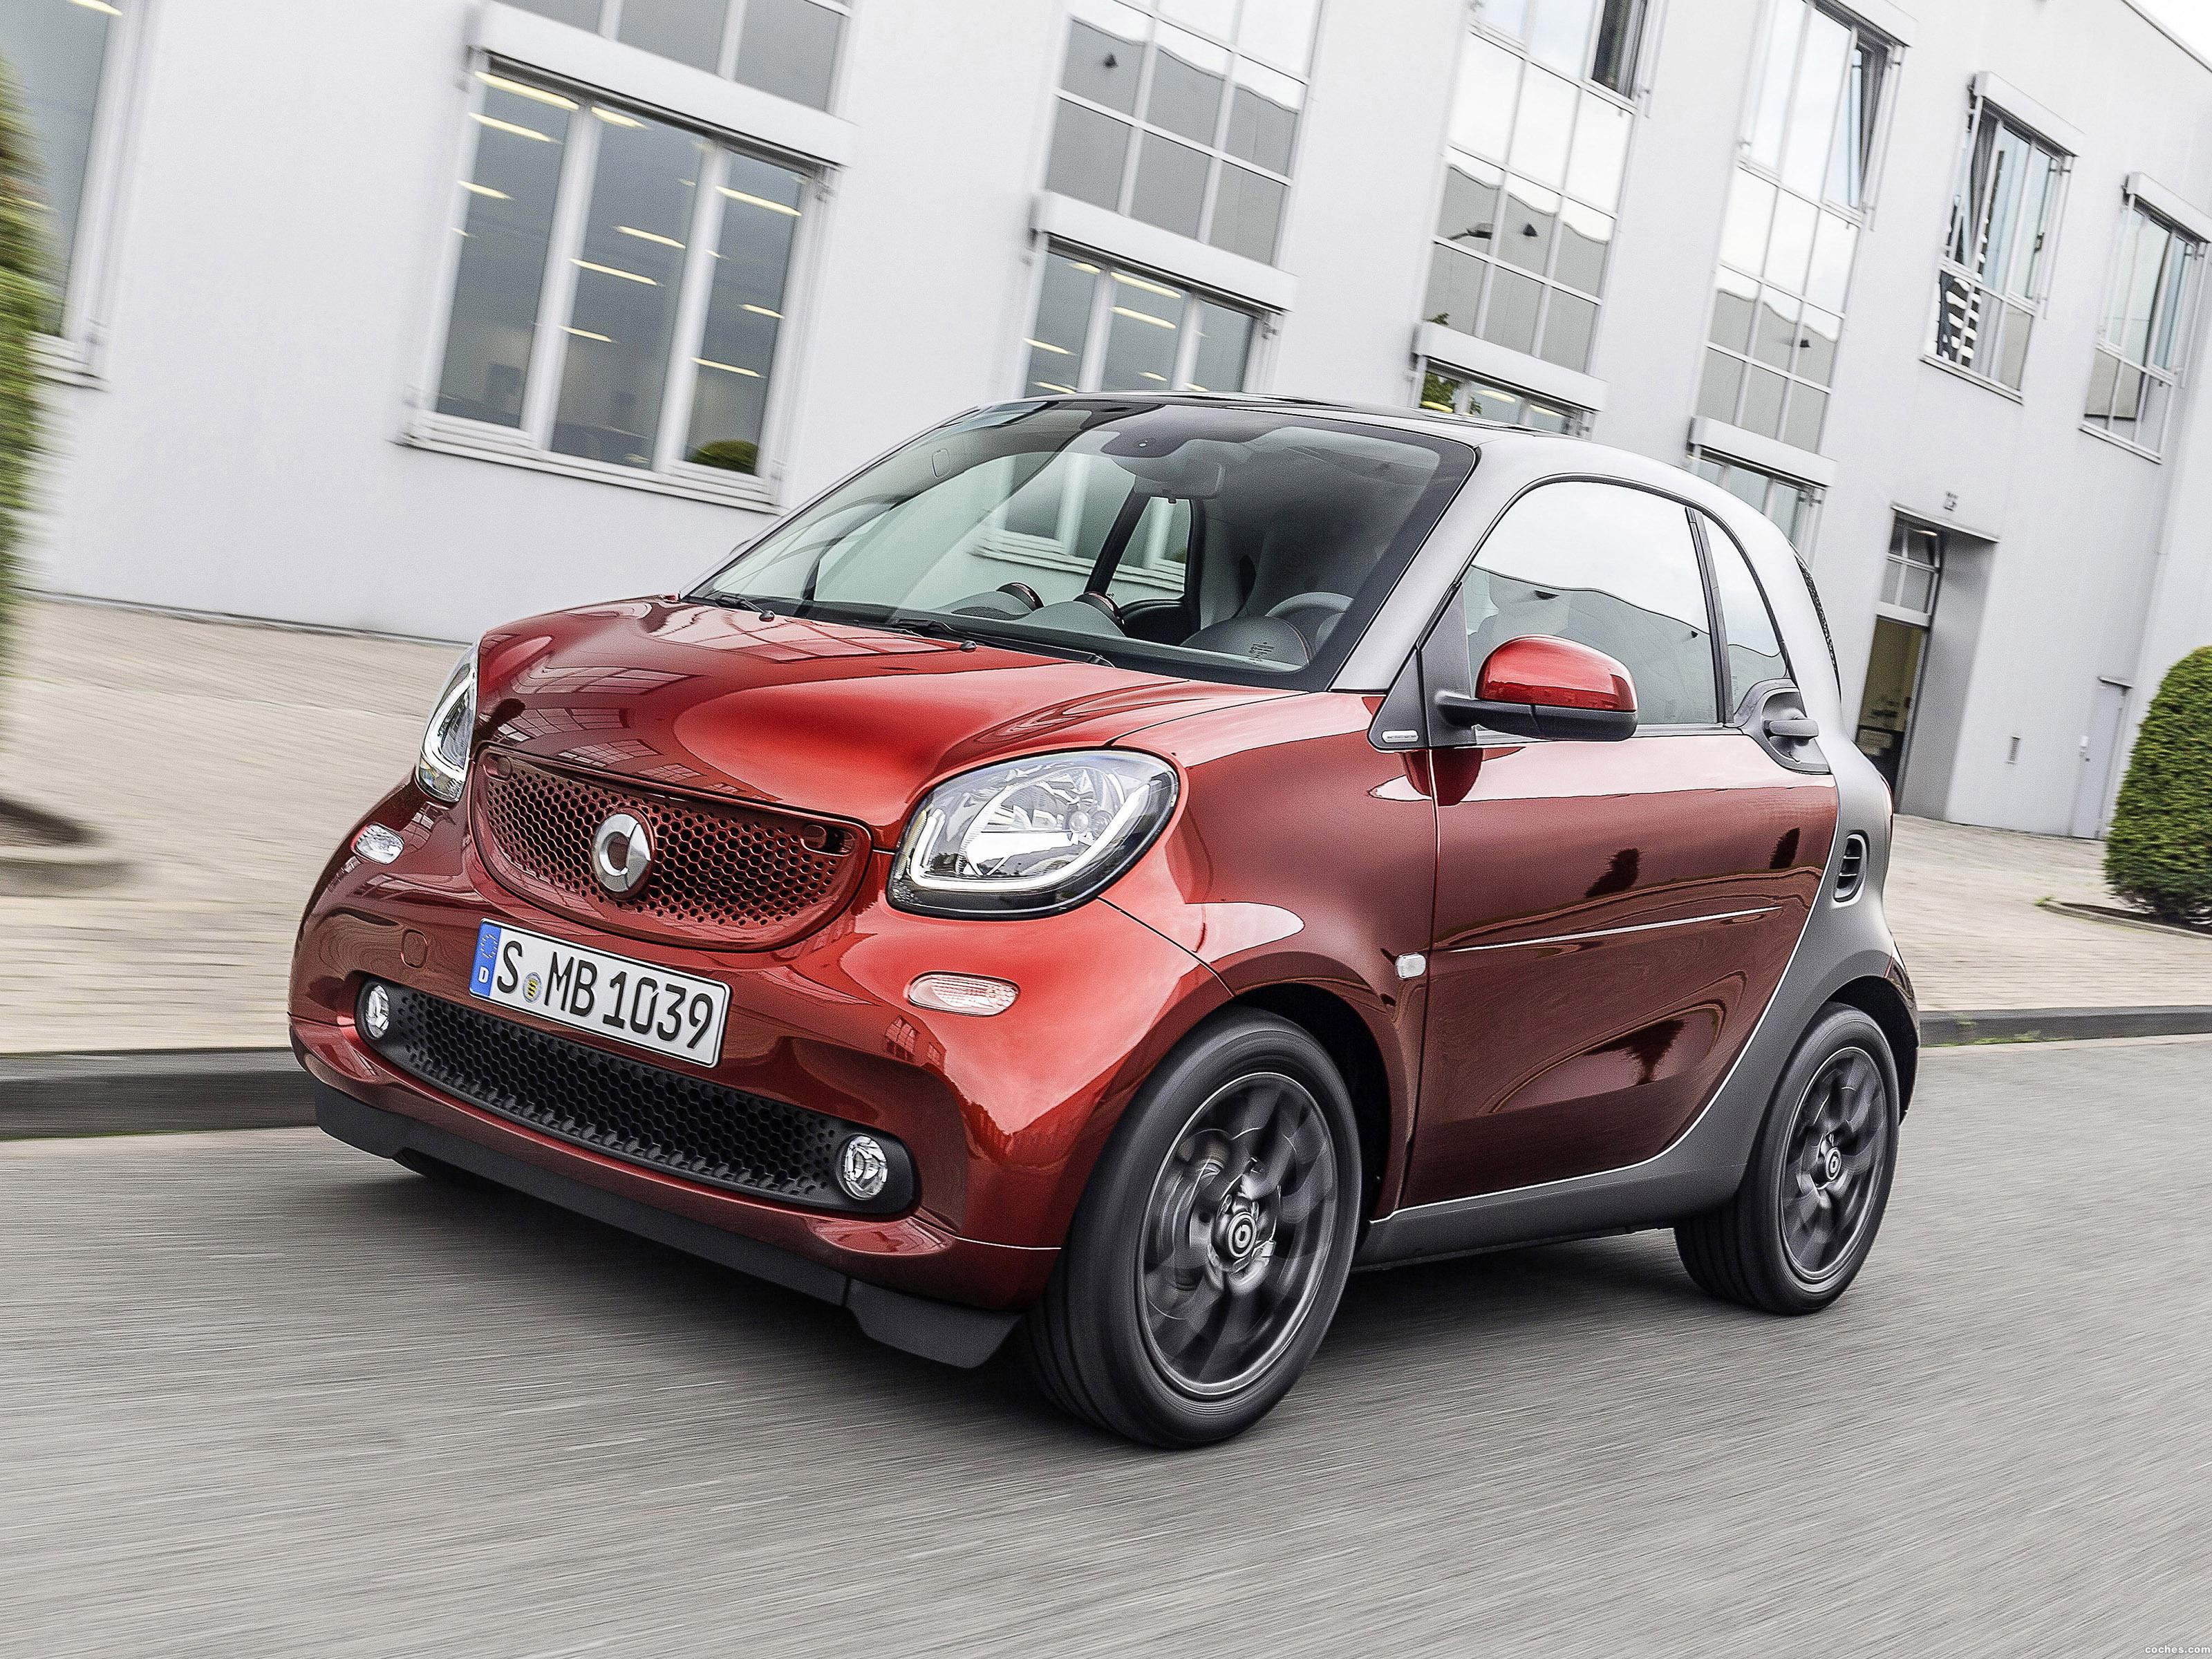 brabus_smart-fortwo-tailor-made-coupe-c453-2015_r19